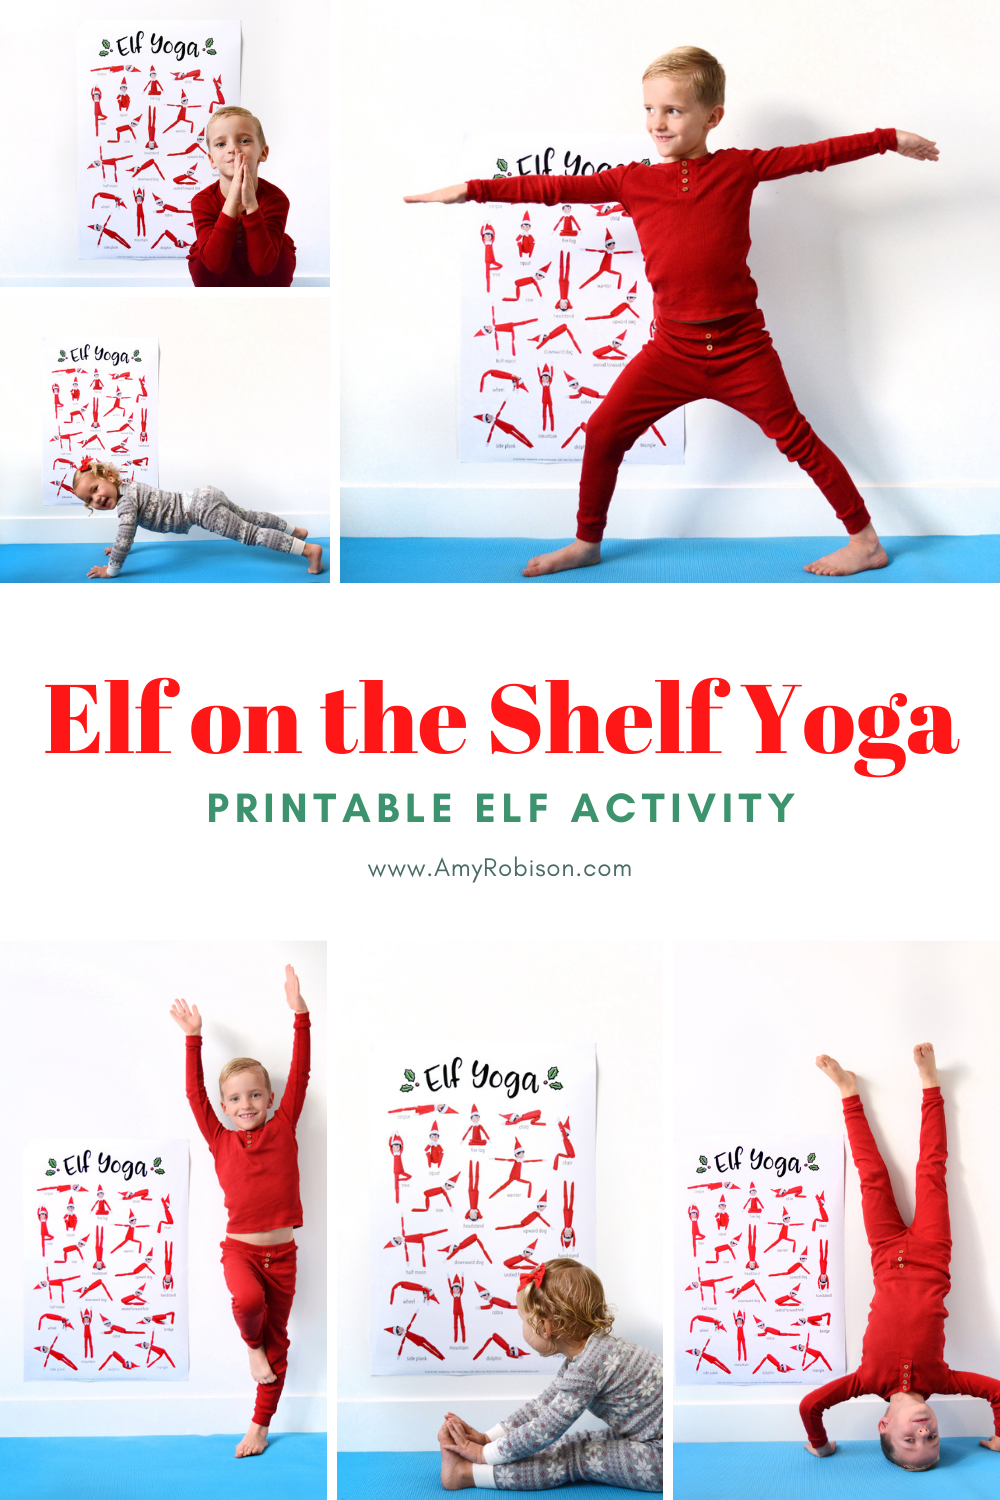 So grab your printable Elf on the Shelf yoga poster, your Elf, and some festive pajamas and get stretching.